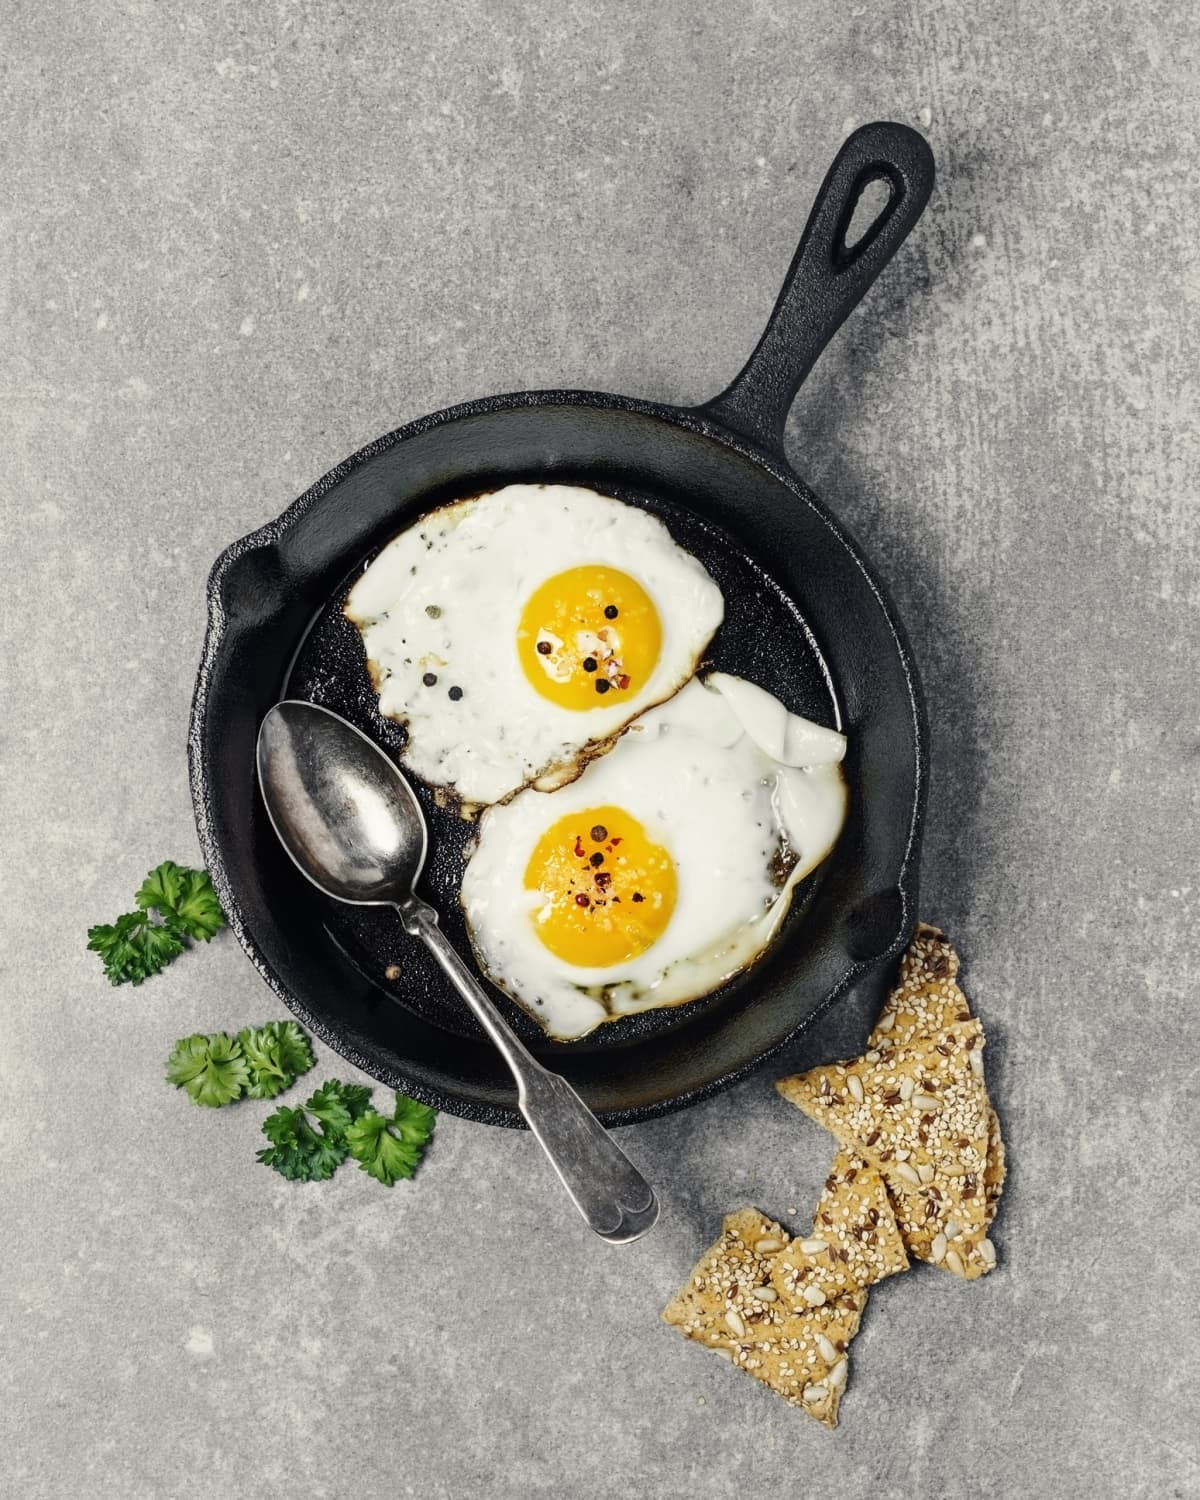 Fried eggs in a skillet against a wooden backdrop.